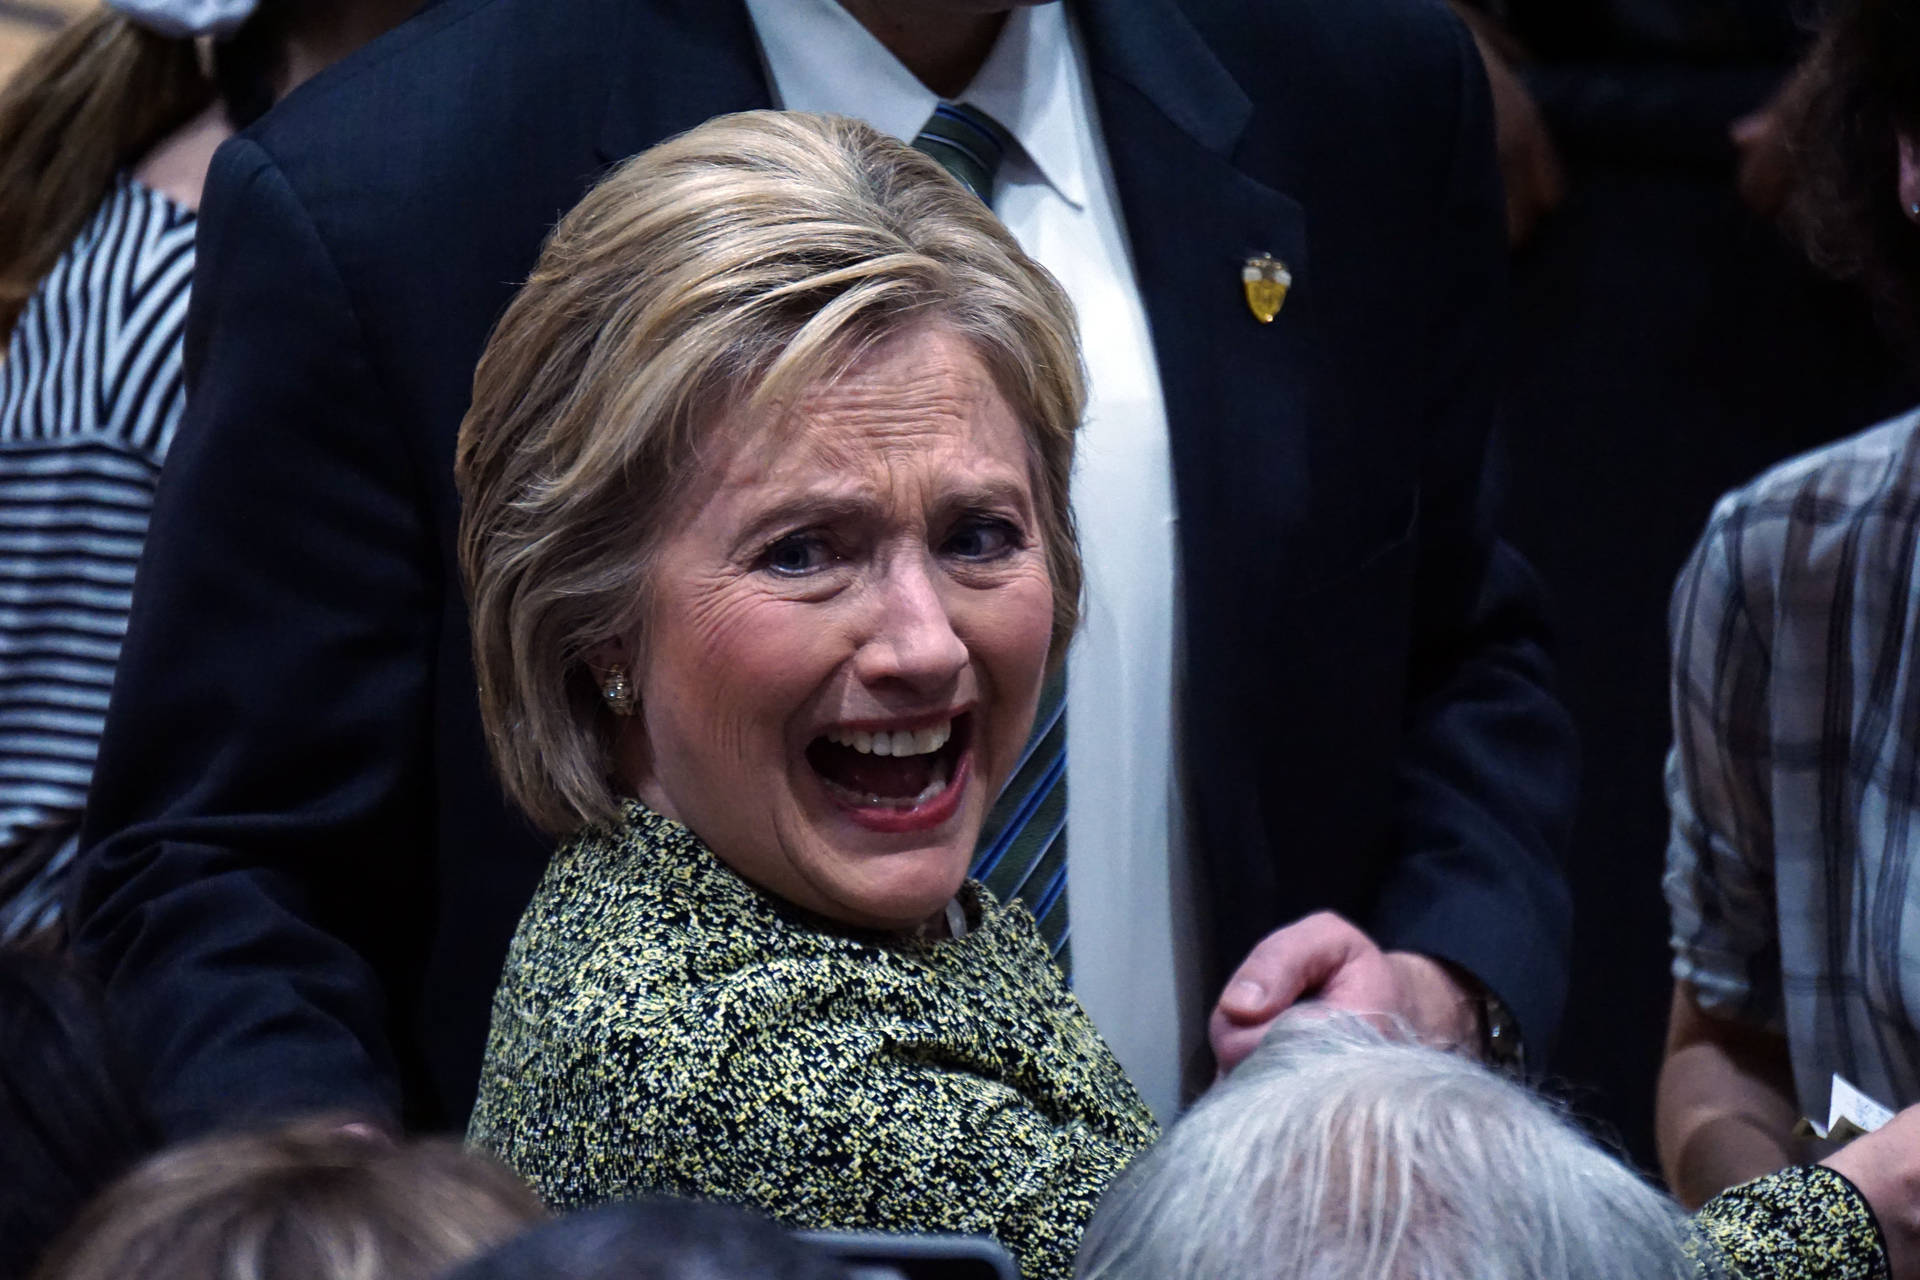 Hillary Clinton With Hilarious Expression